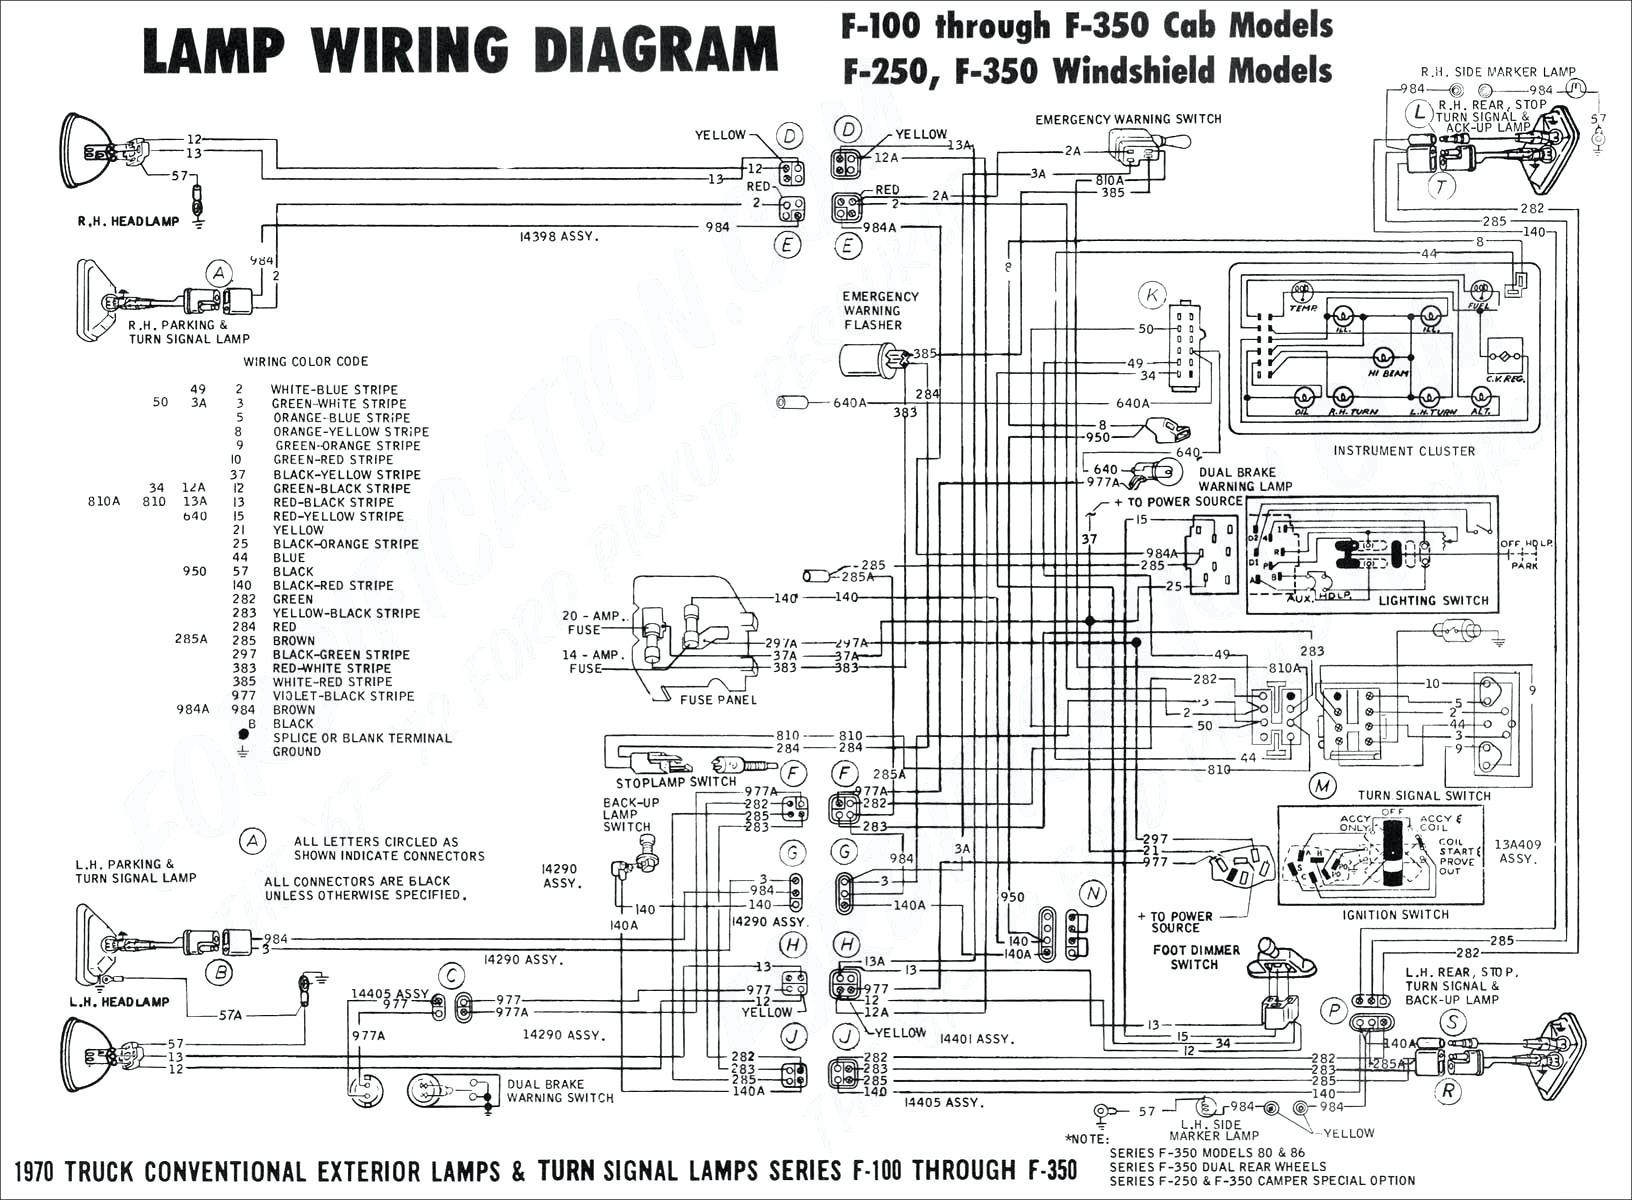 Wiring Diagrams For Turn Signal Best Stop Turn Tail Light Wiring